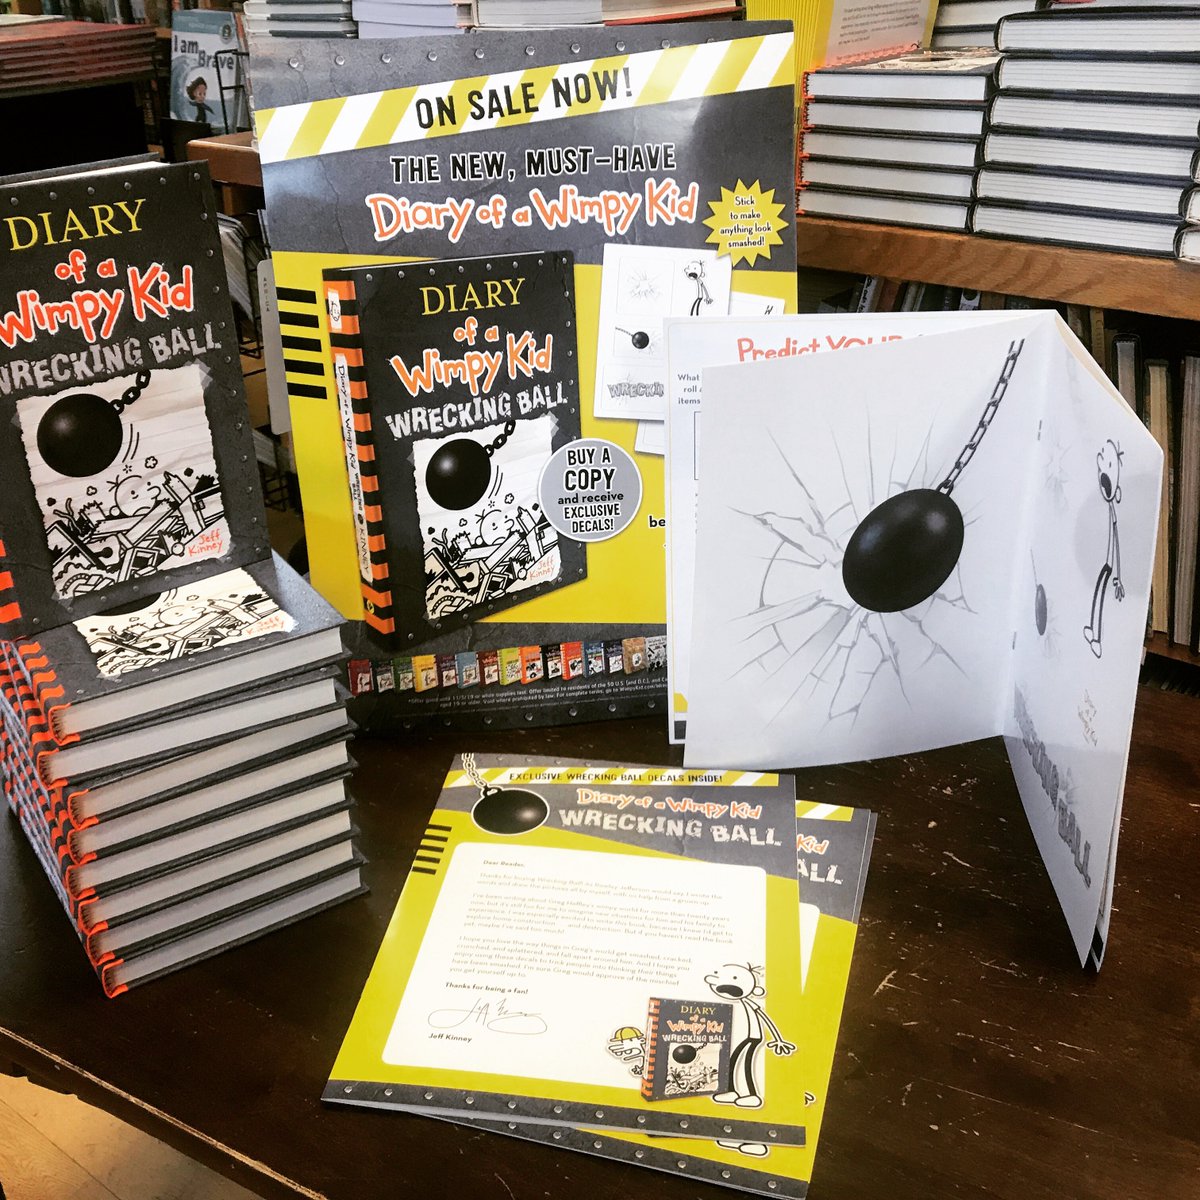 Get your copy of # WreckingBall, the 14th @wimpykid book! Don't forget to pick up a bonus gift of activities and stickers! #801life #amuletbooks